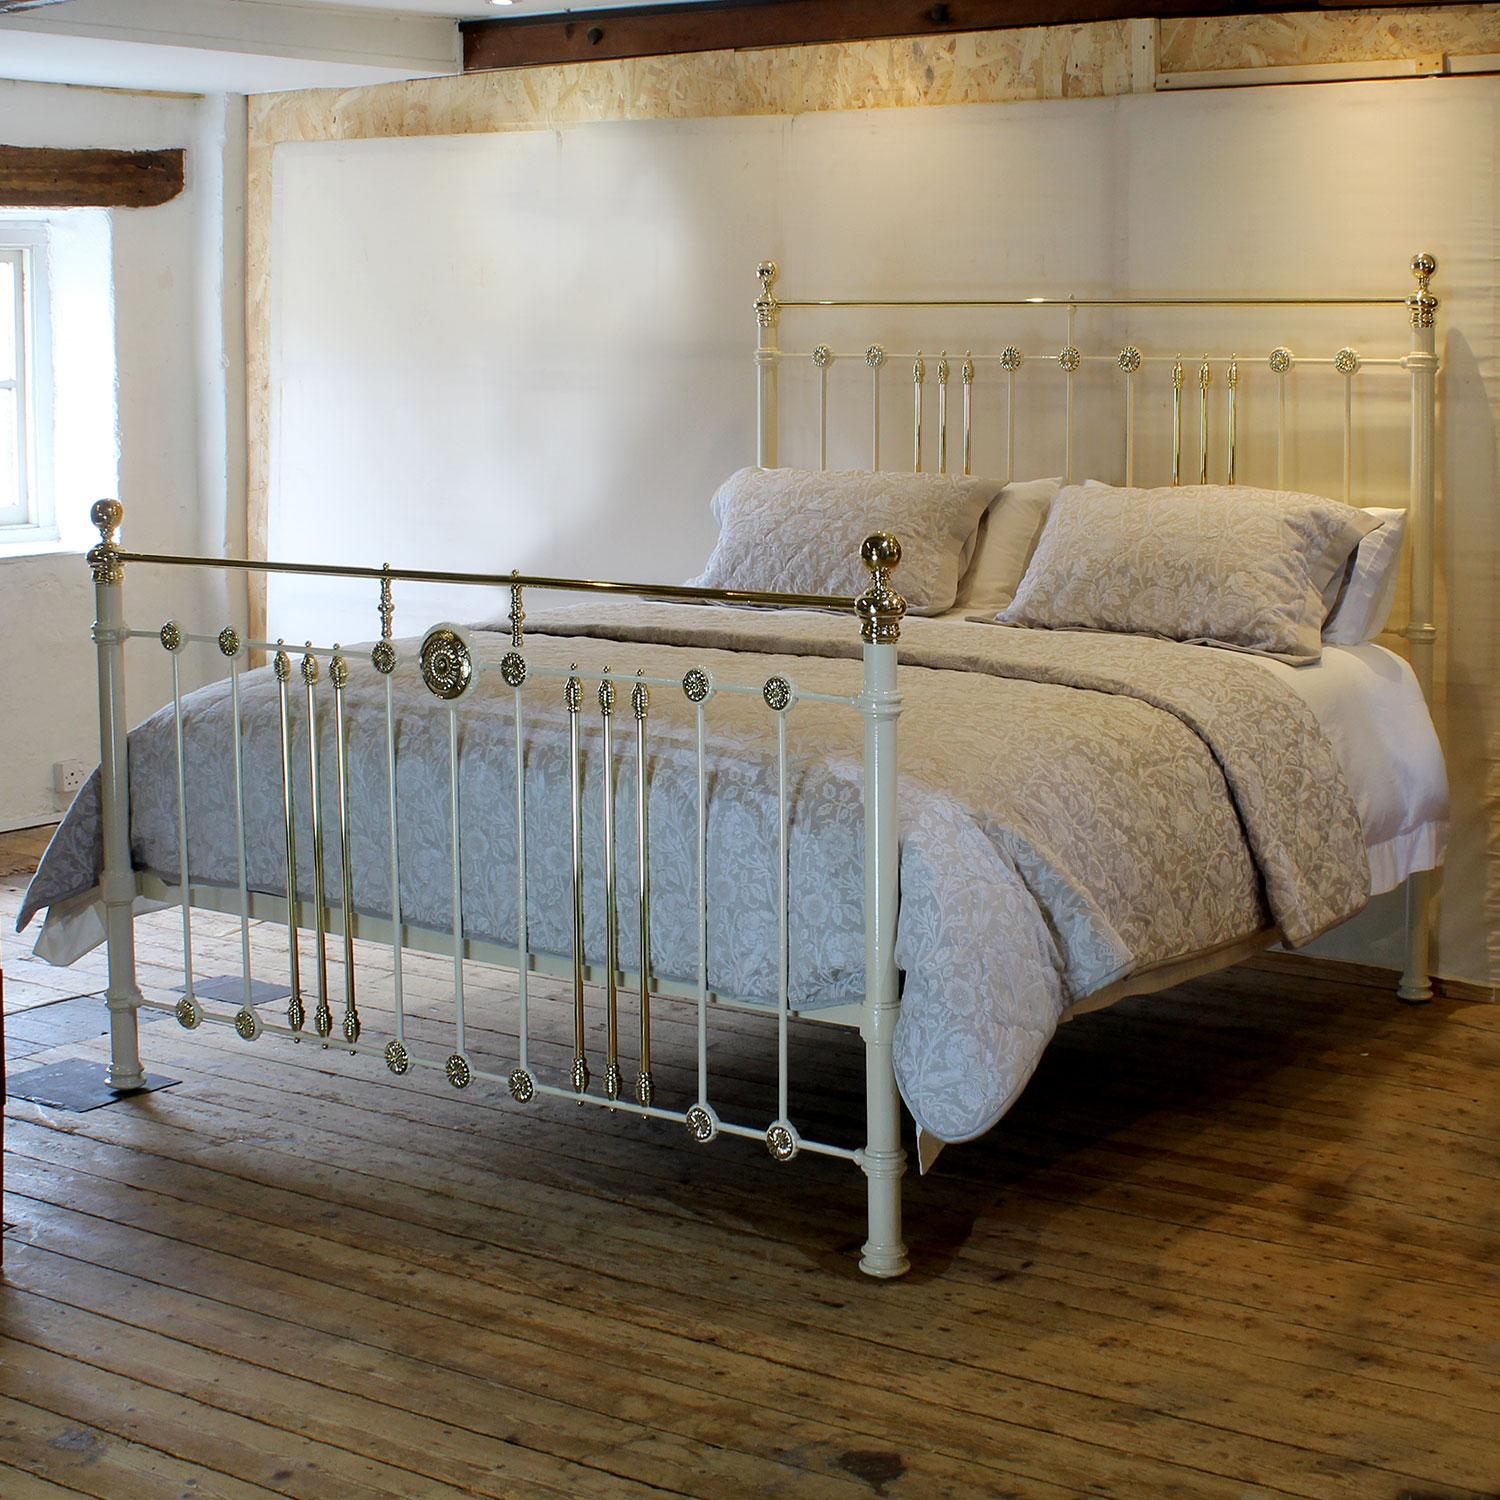 An attractive 6ft wide (72 inches) brass and iron antique bed finished in cream with brass rosette decoration and straight brass top rail, adapted and extended from an original Victorian frame, circa 1895.

This bed accepts a UK Super King or